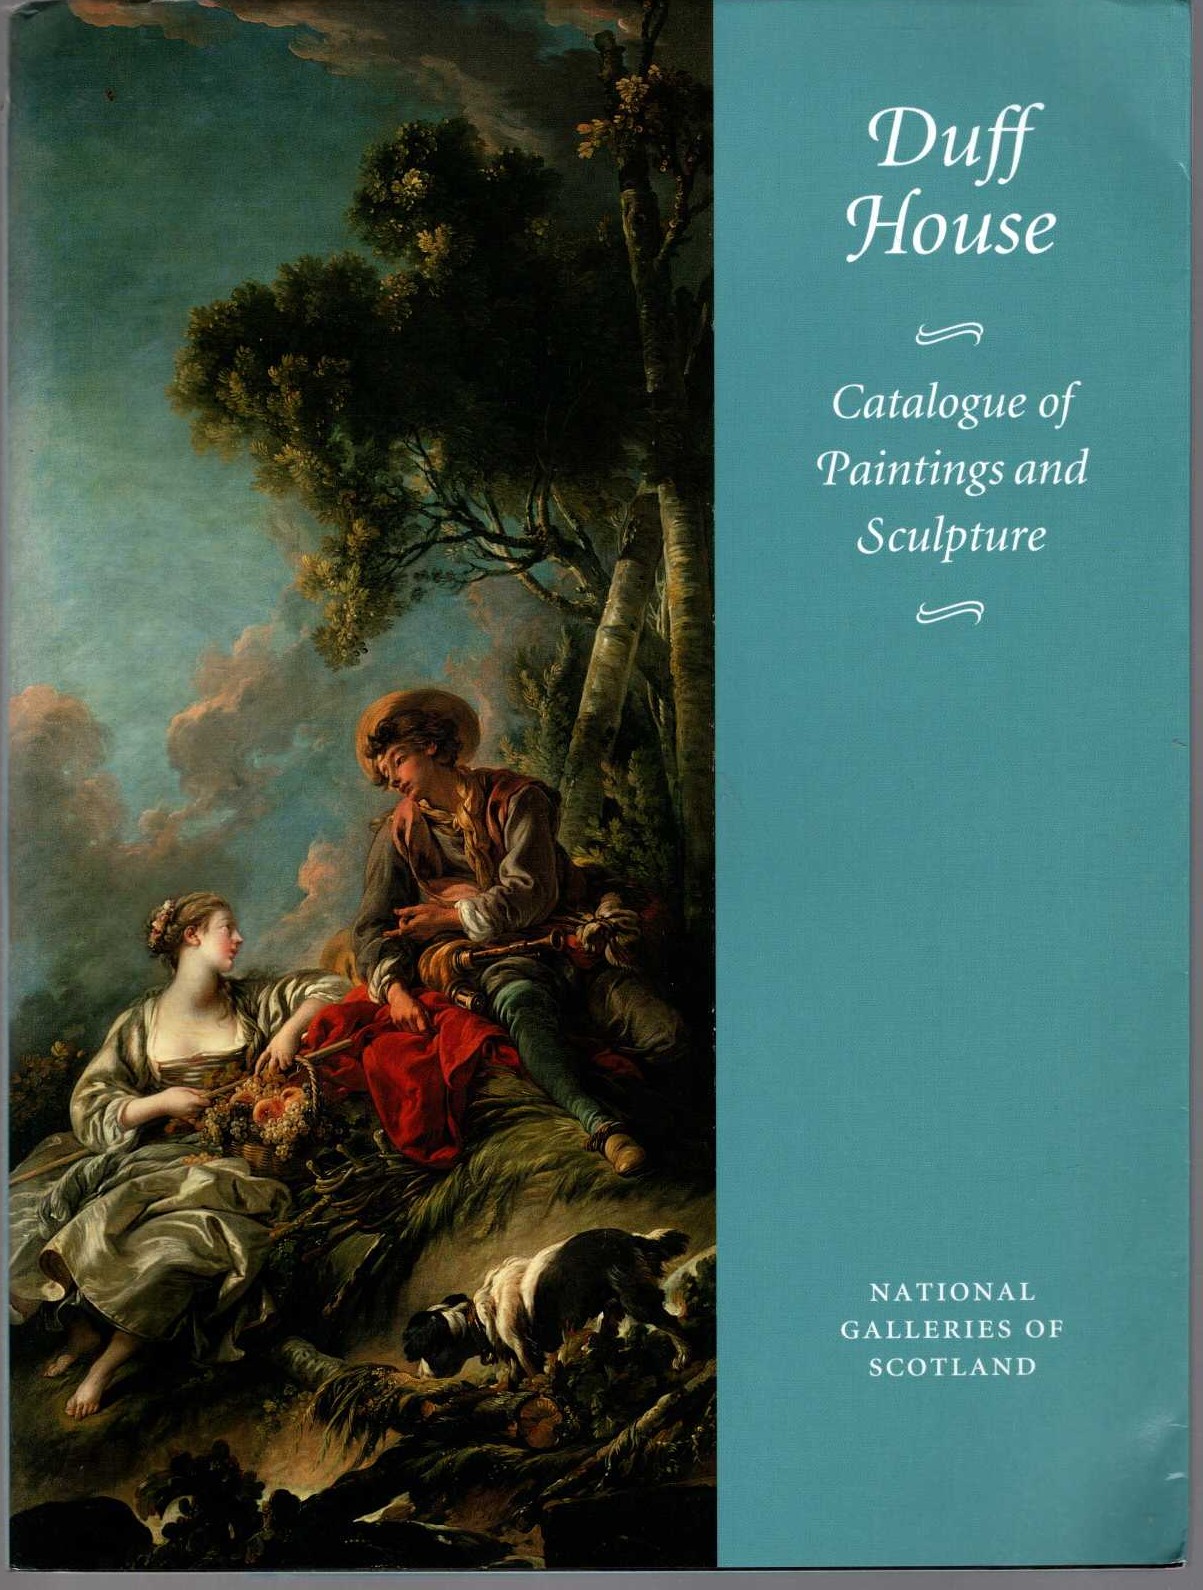 \ DUFF HOUSE. Catalogue of Paintings and Sculpture by National Galleries of Scotland front book cover image